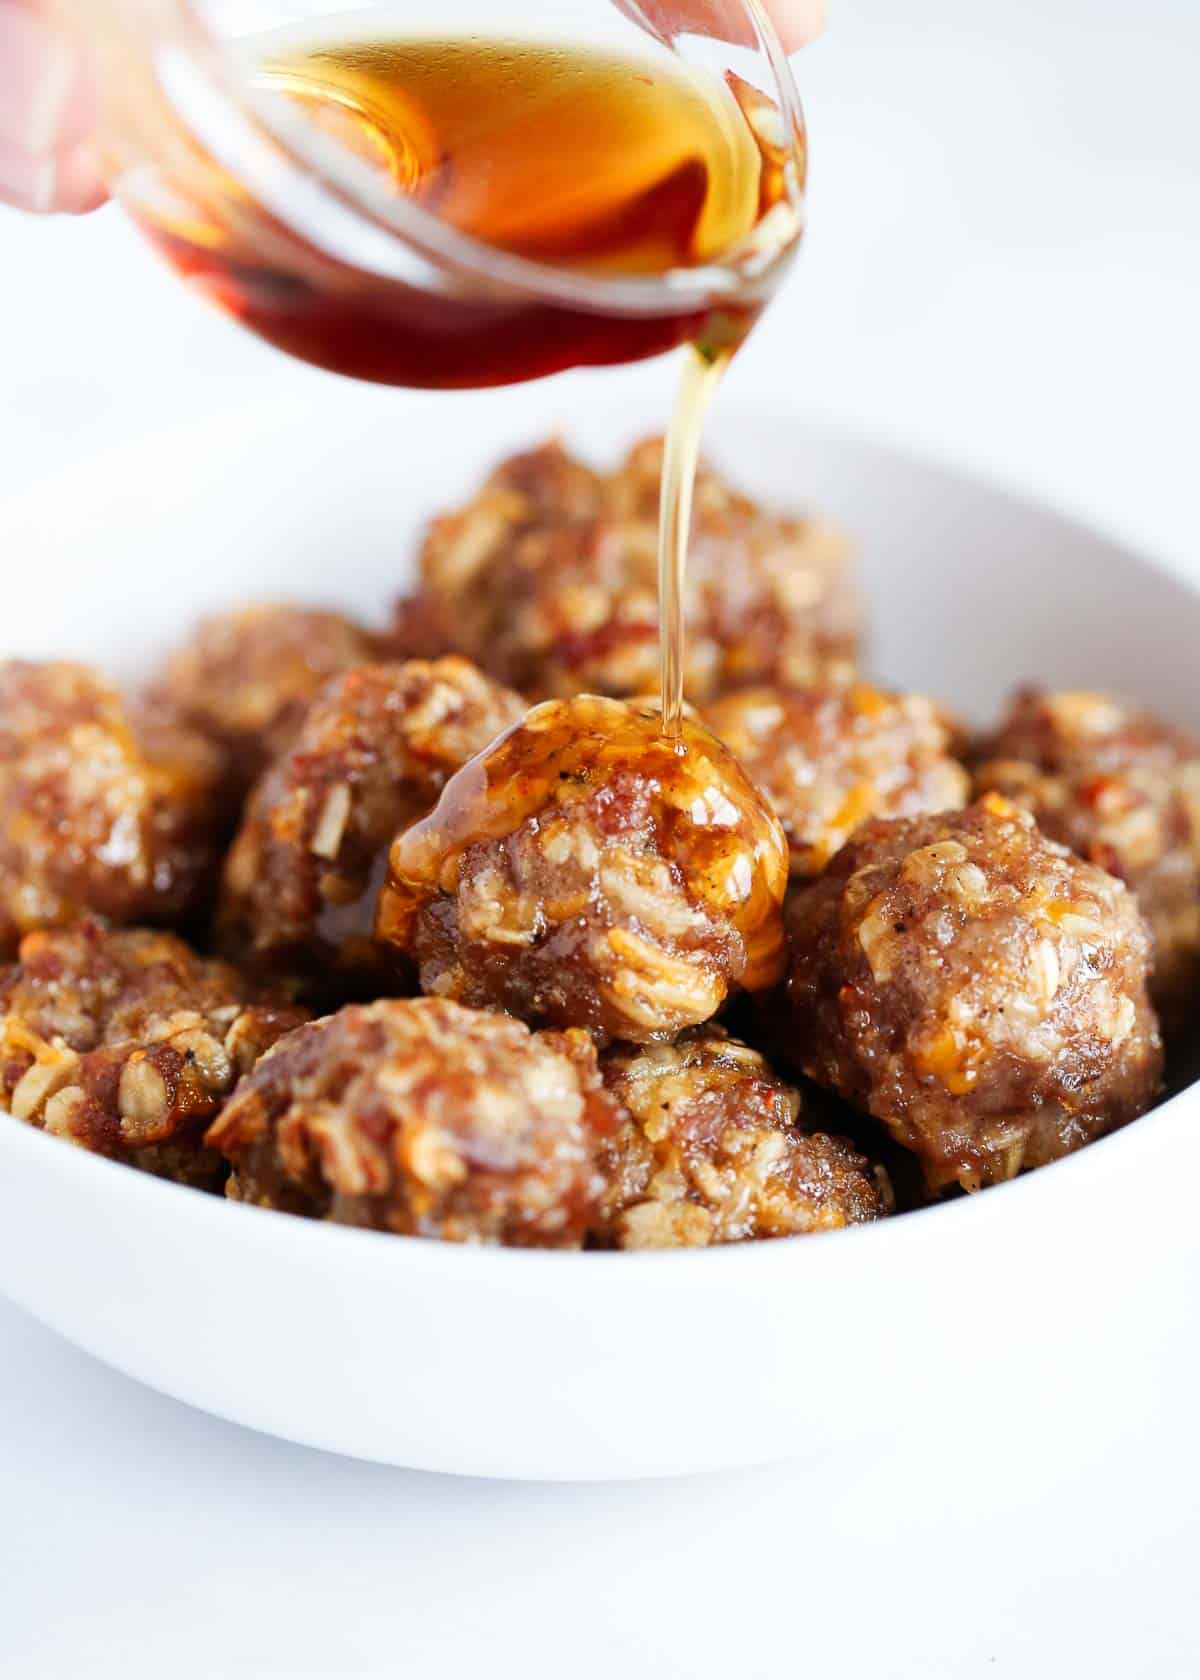 Pouring maple syrup on breakfast meatballs.